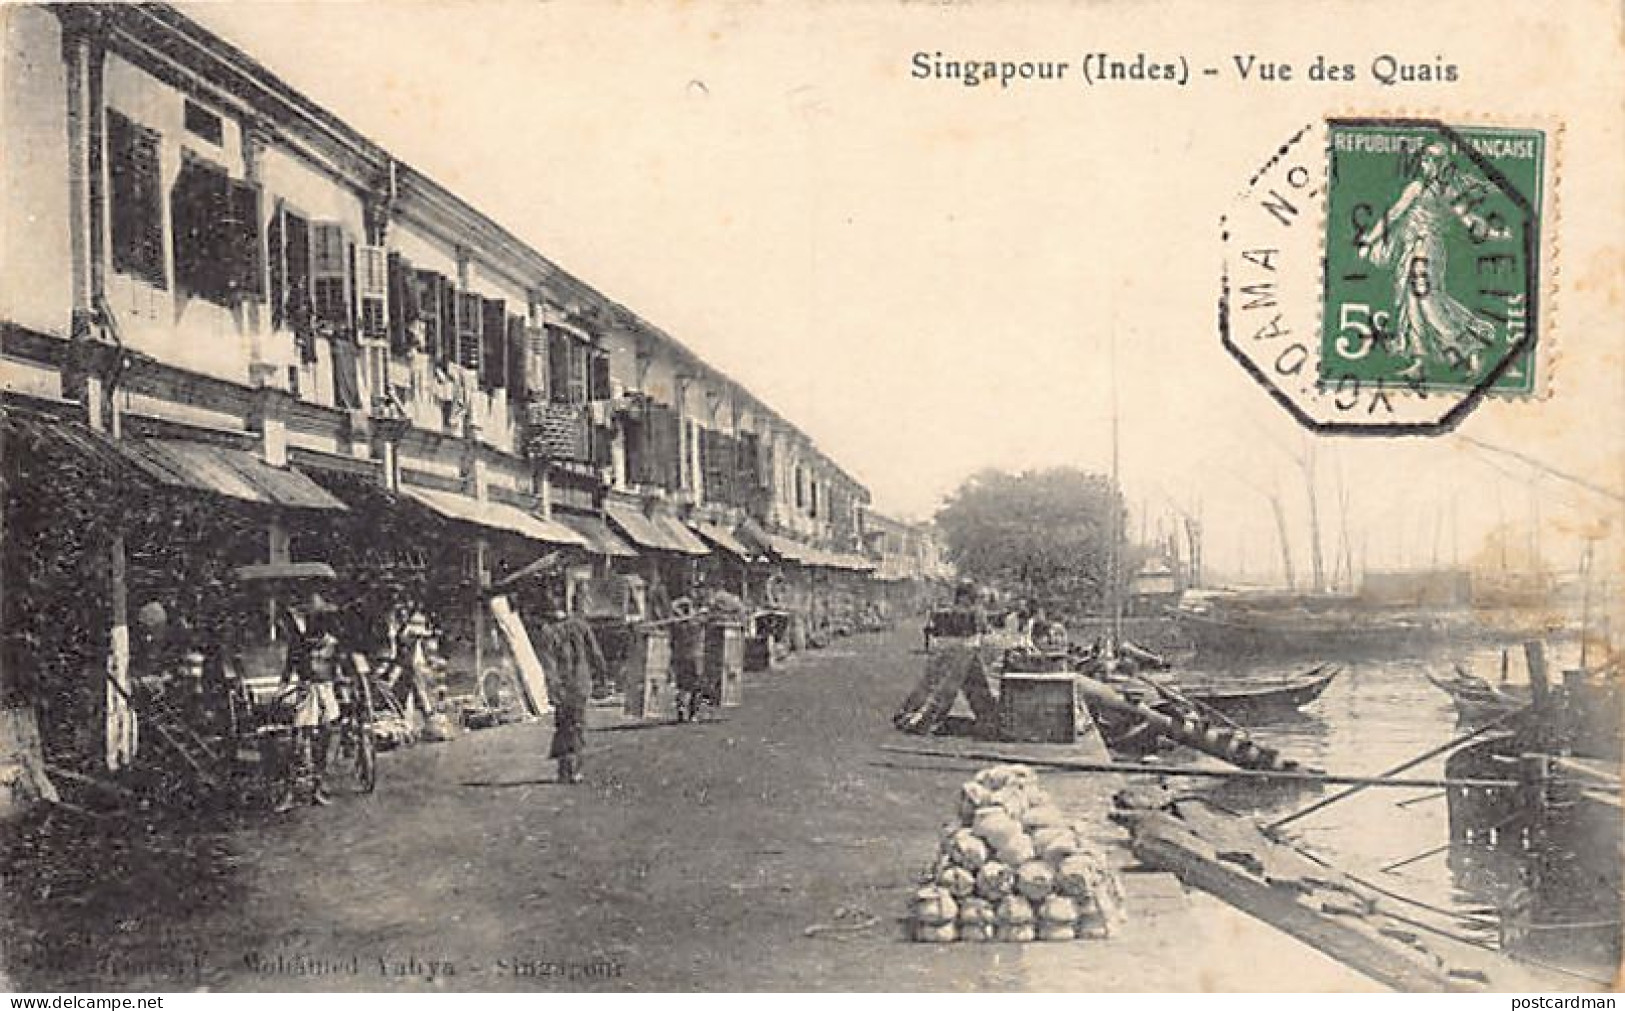 Singapore - View Of The Quays - Publ. H. Grimaud A M. Yahya  - Singapore